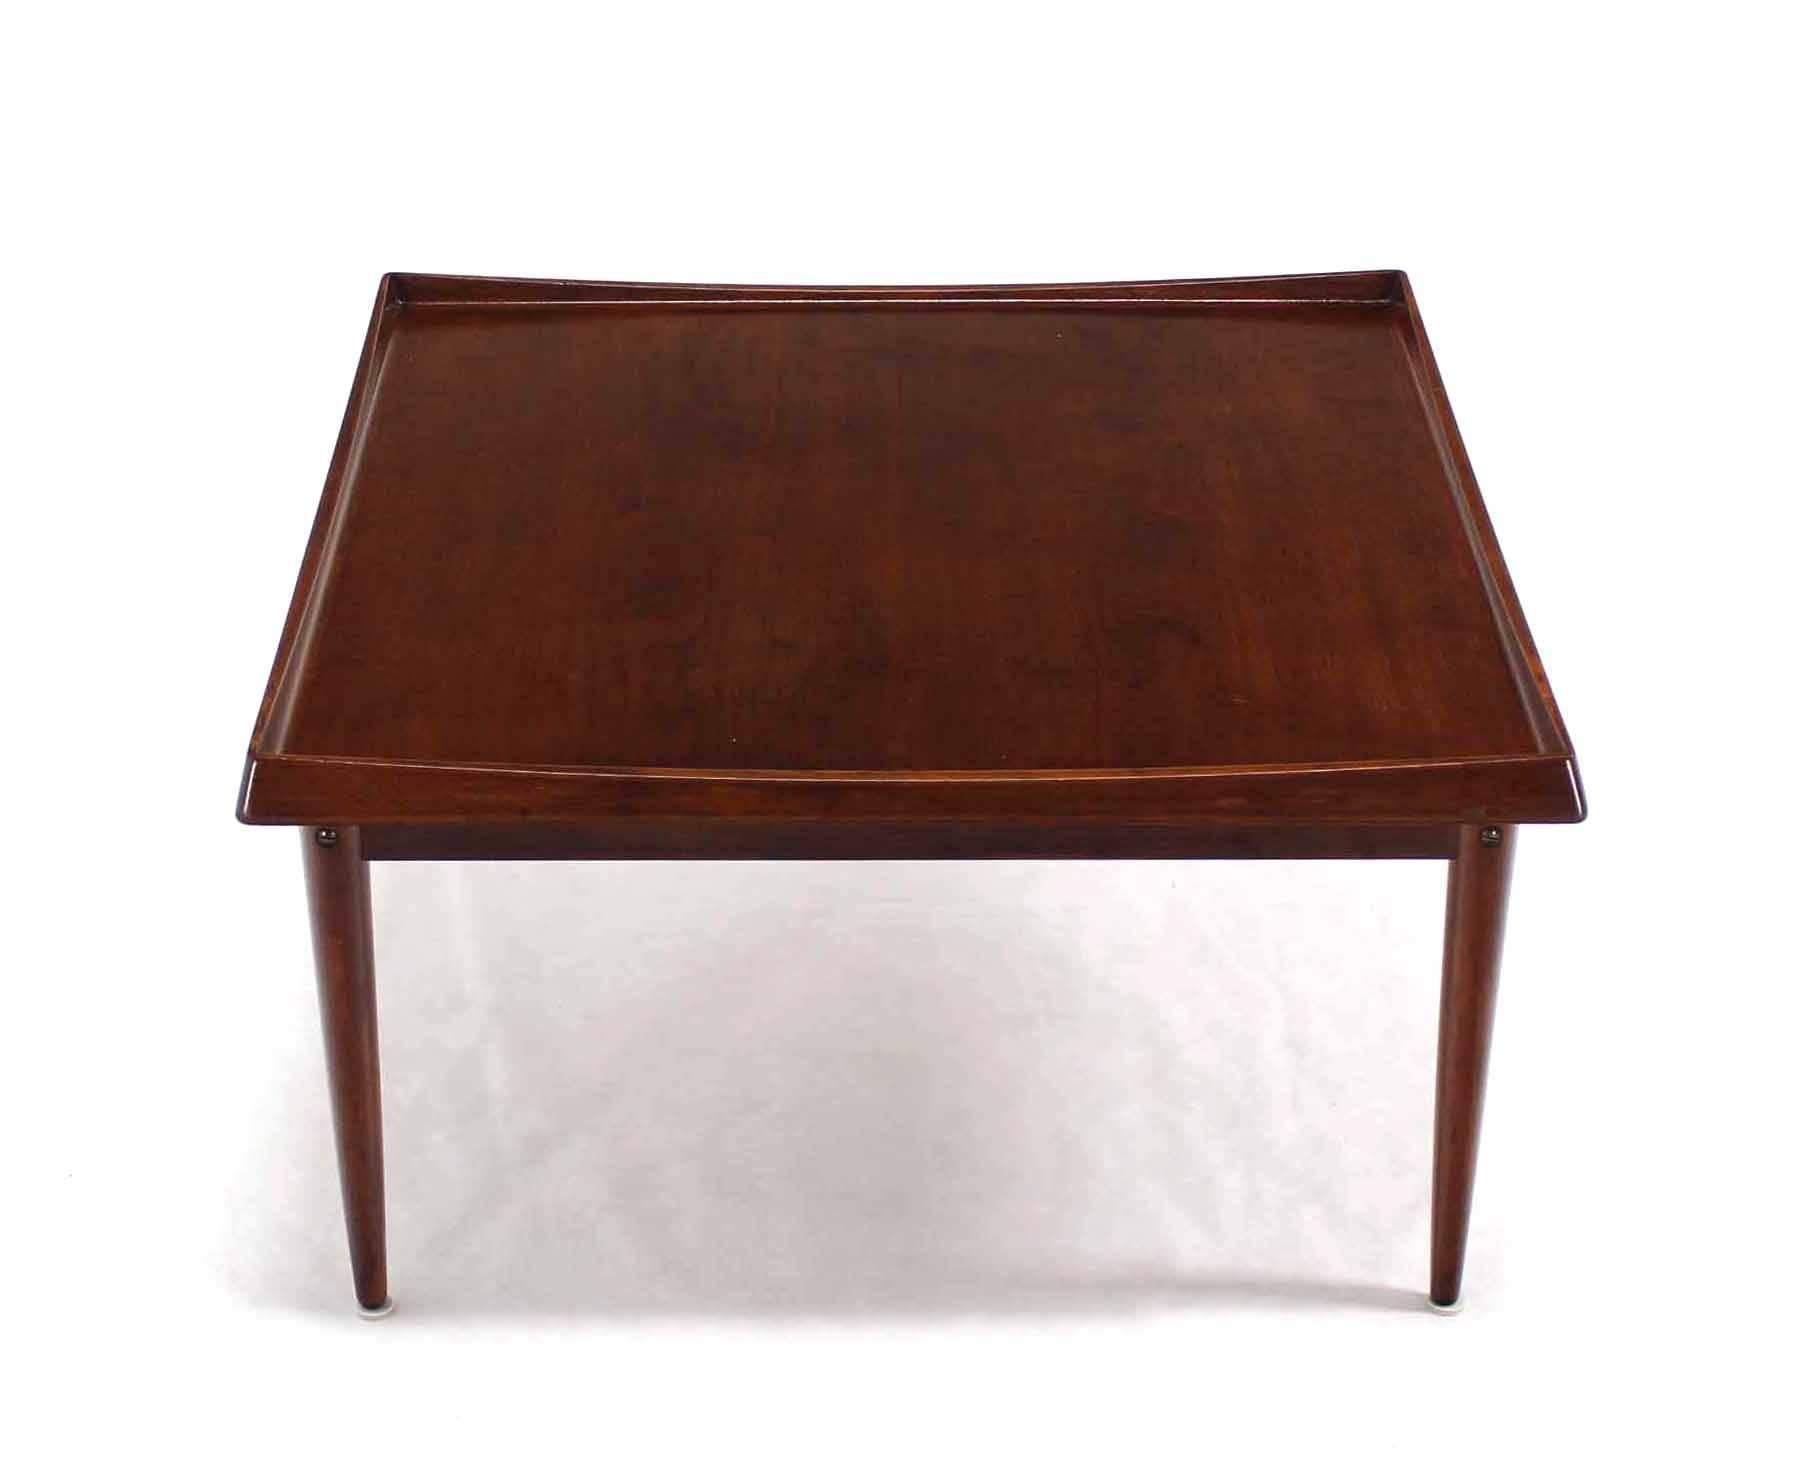 Nice Danish modern square teak coffee table with nice solid teak rolled edge. Made in Norway.